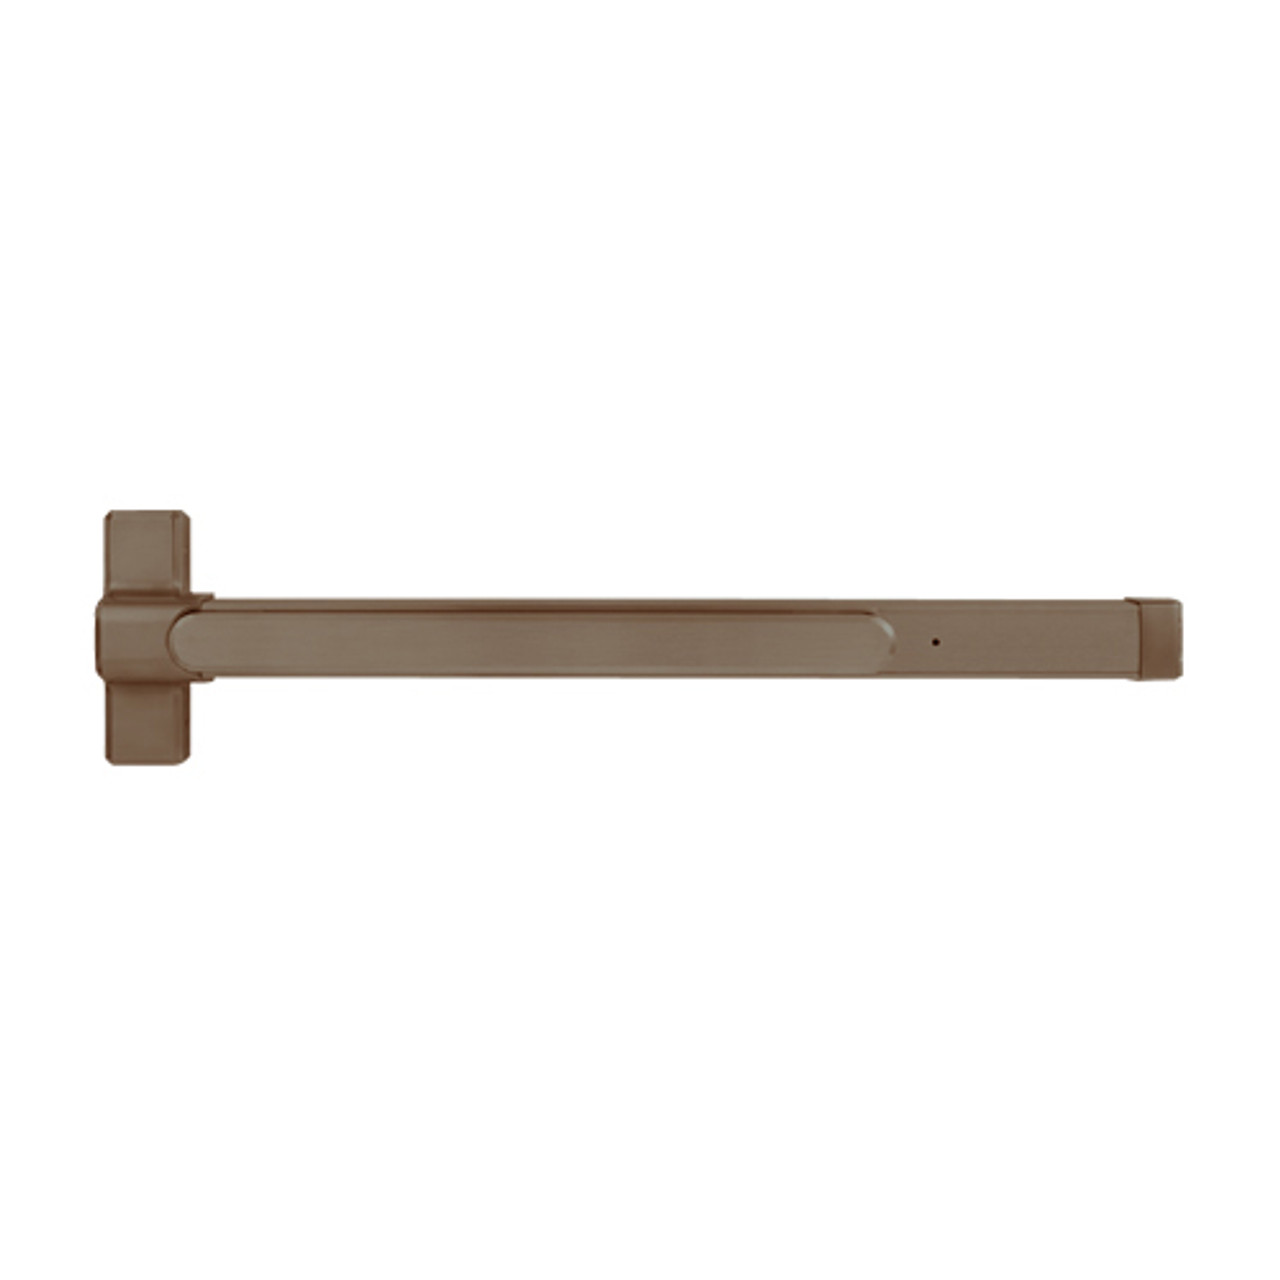 QED129LRX-36-7-313AN Stanley QED100 Series Heavy Duty Concealed Vertical Rod Fire Rated Exit Device in Anodized Duranodic Bronze Finish